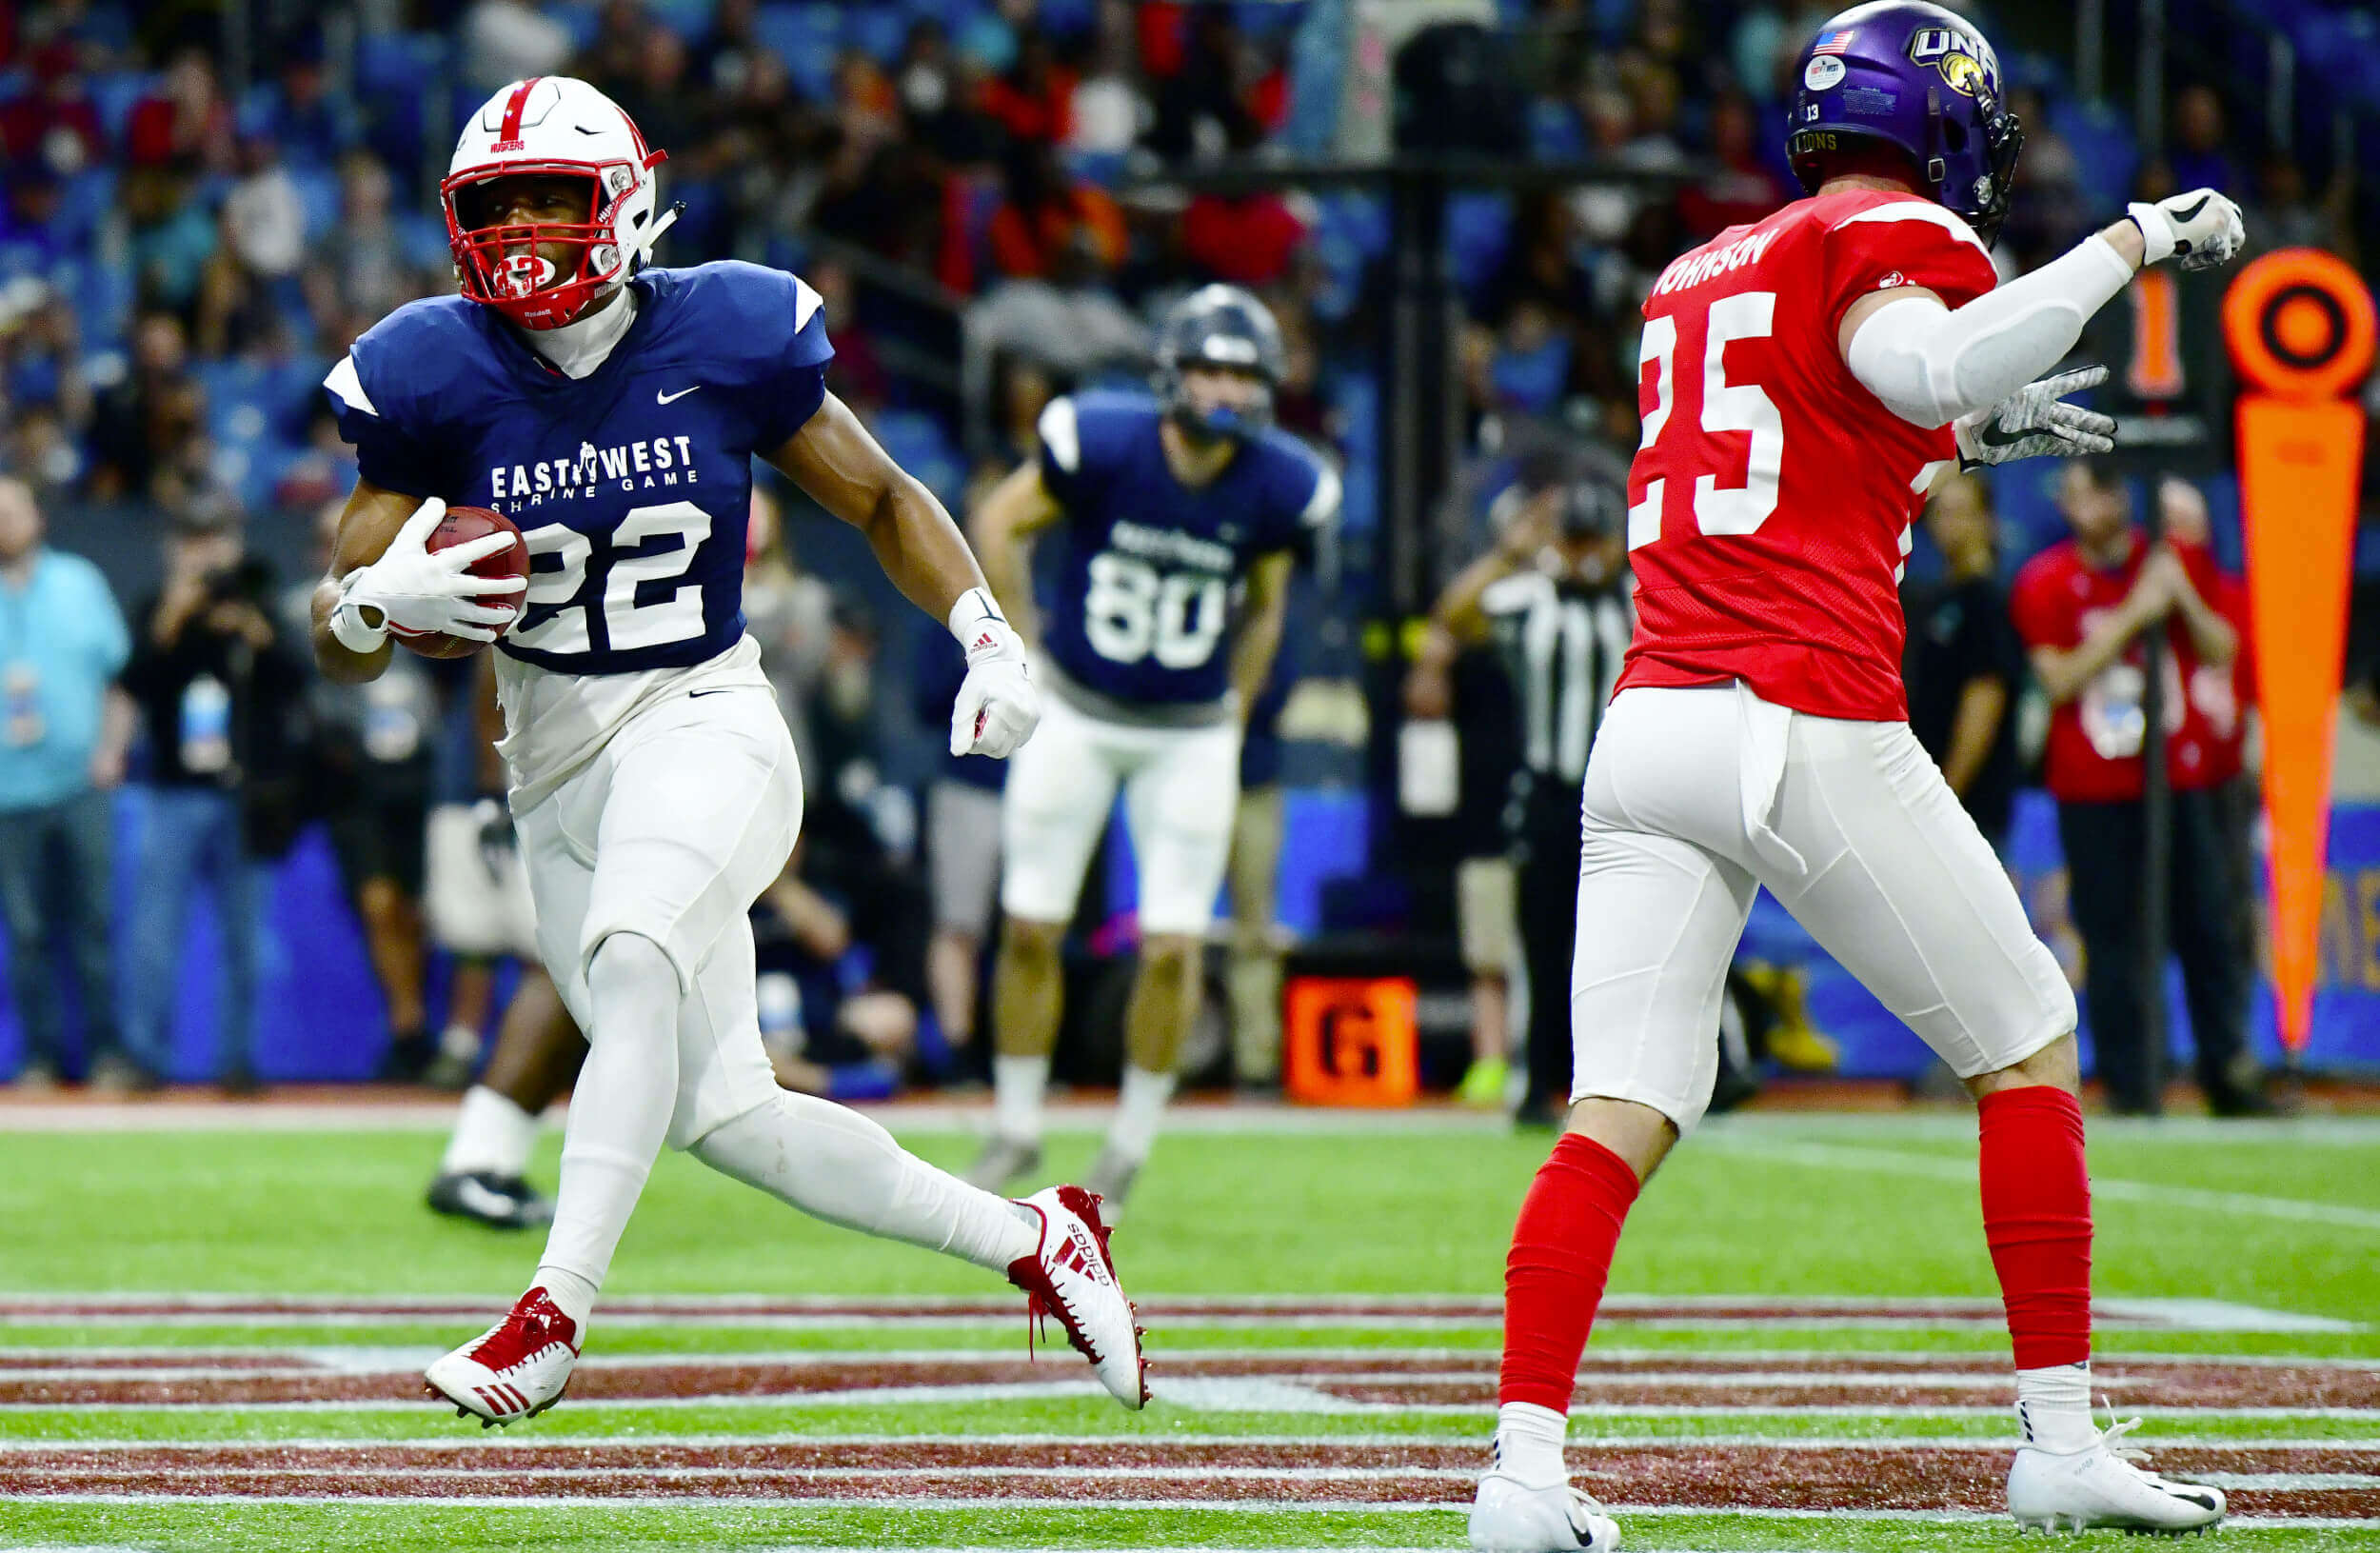 East West Shrine Game: All You Need to Know